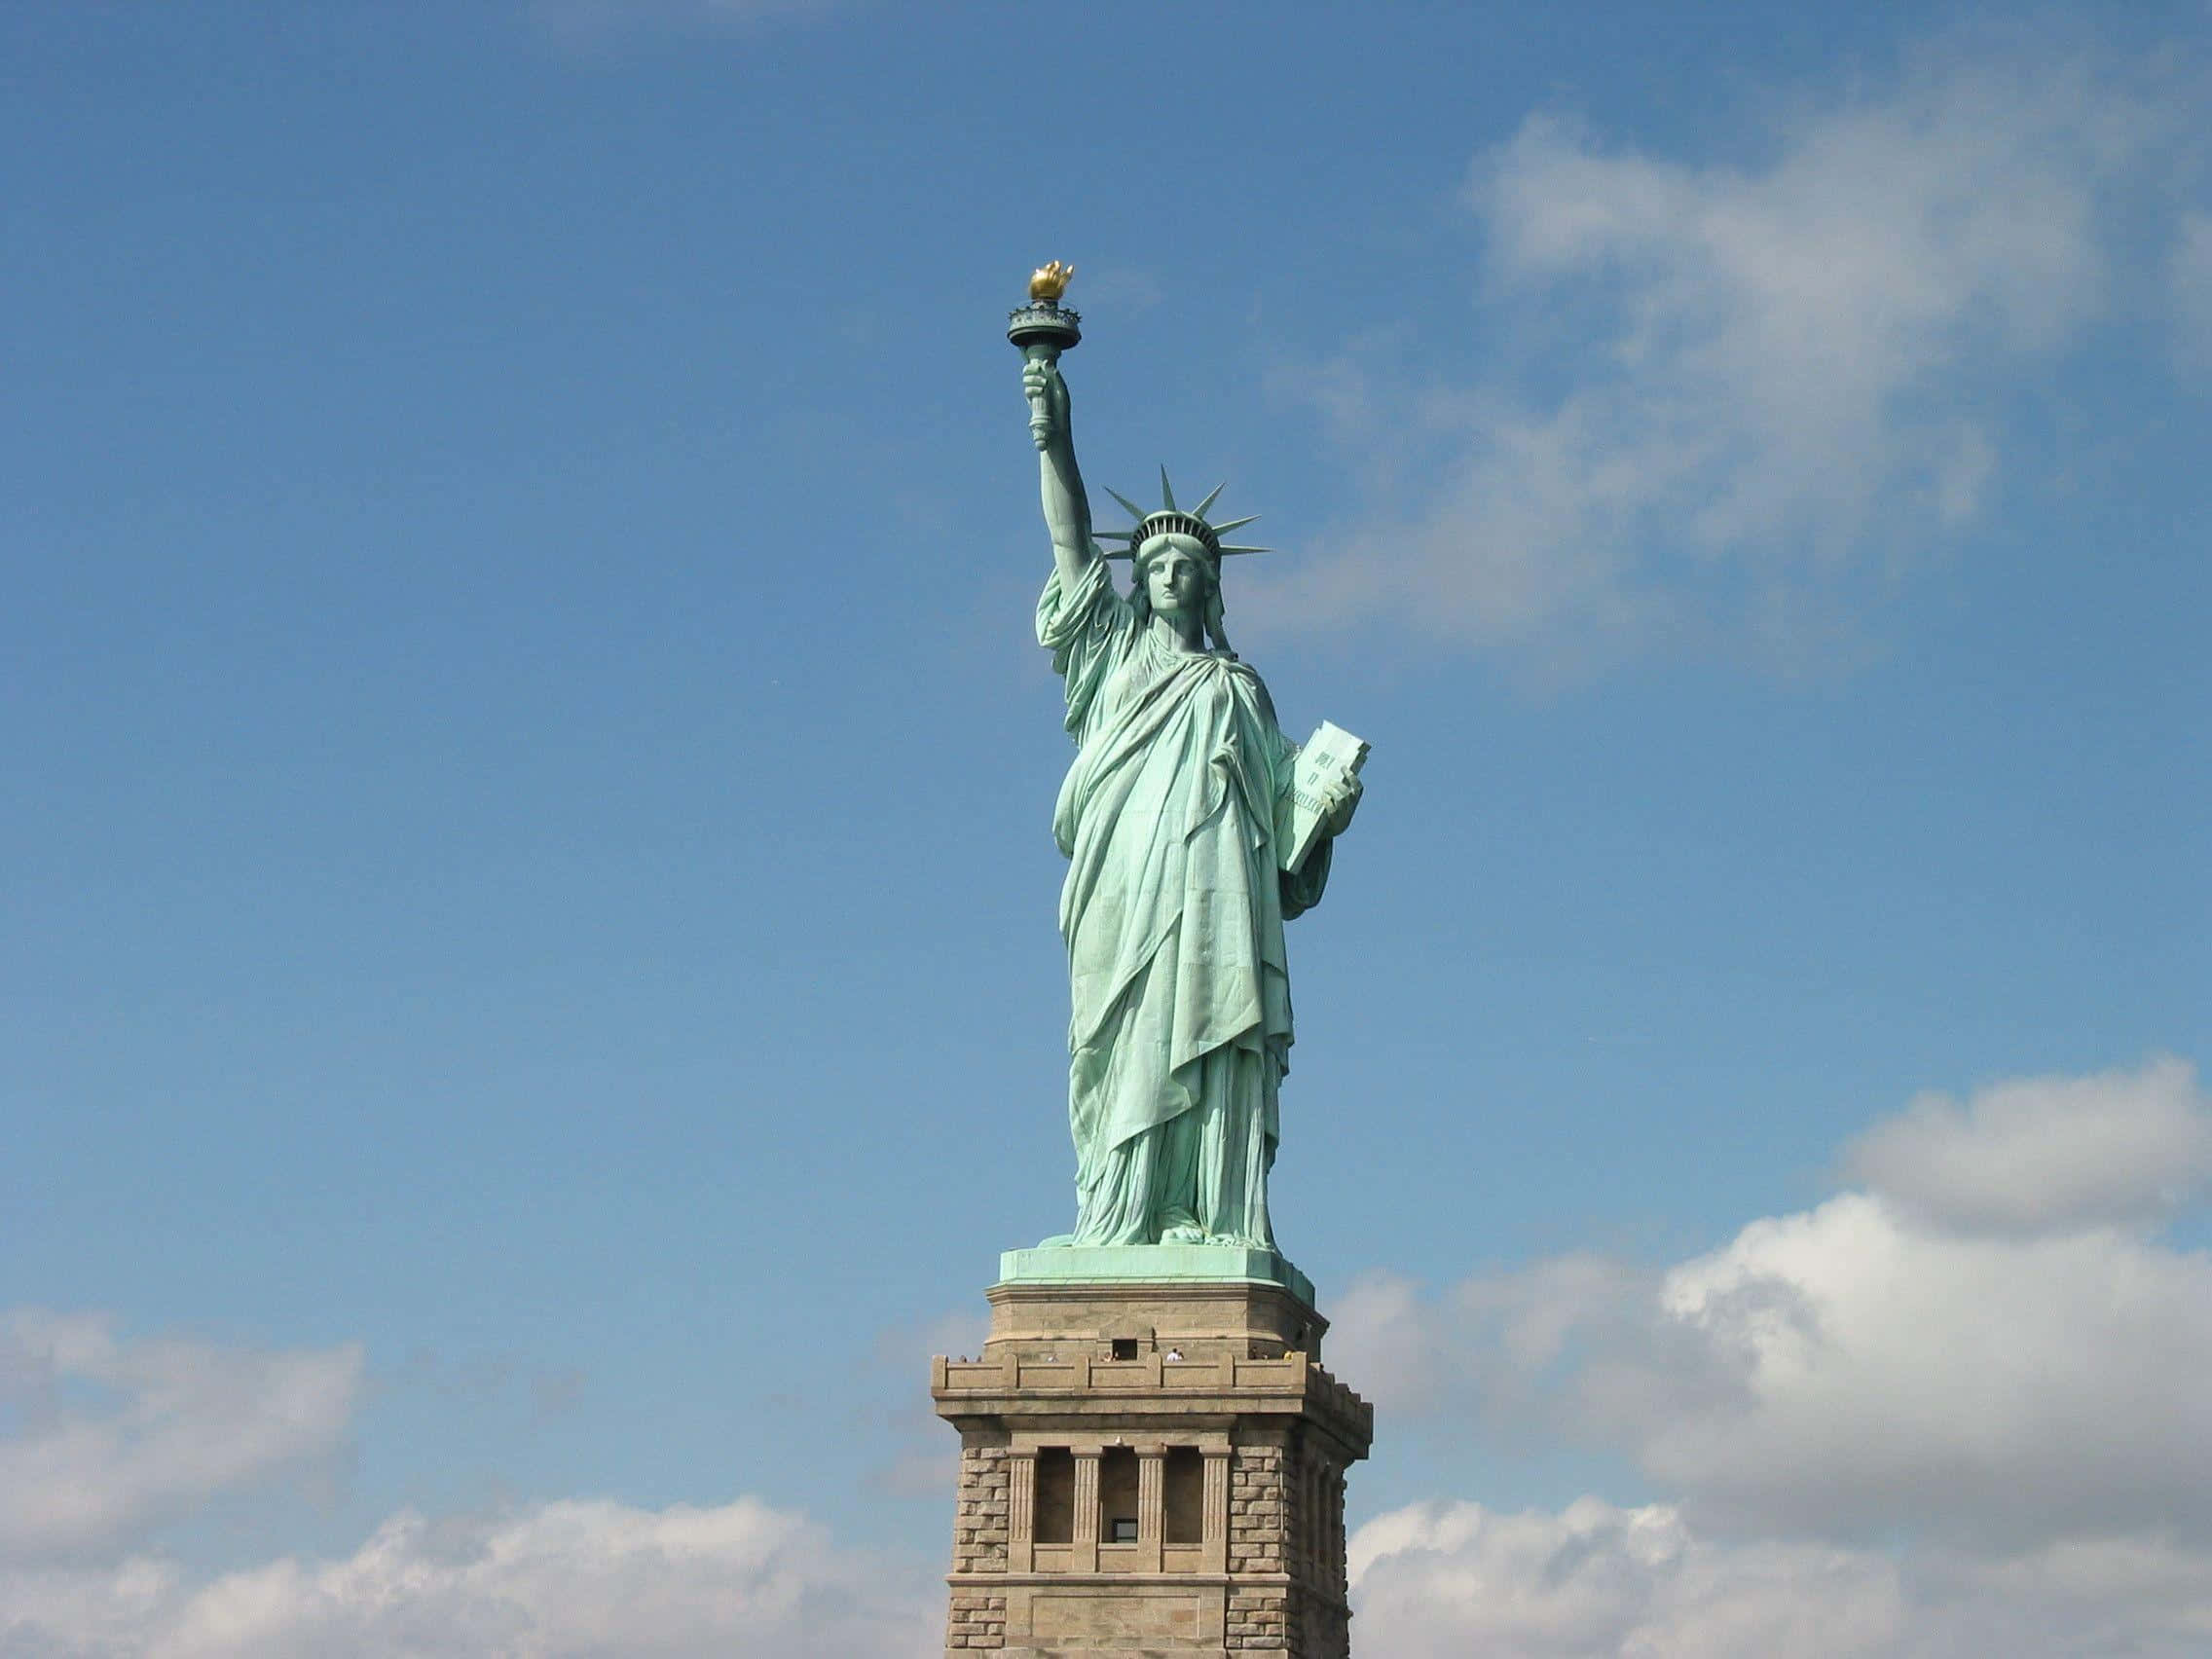 The larger-than-life Statue of Liberty, a symbol of freedom and democracy